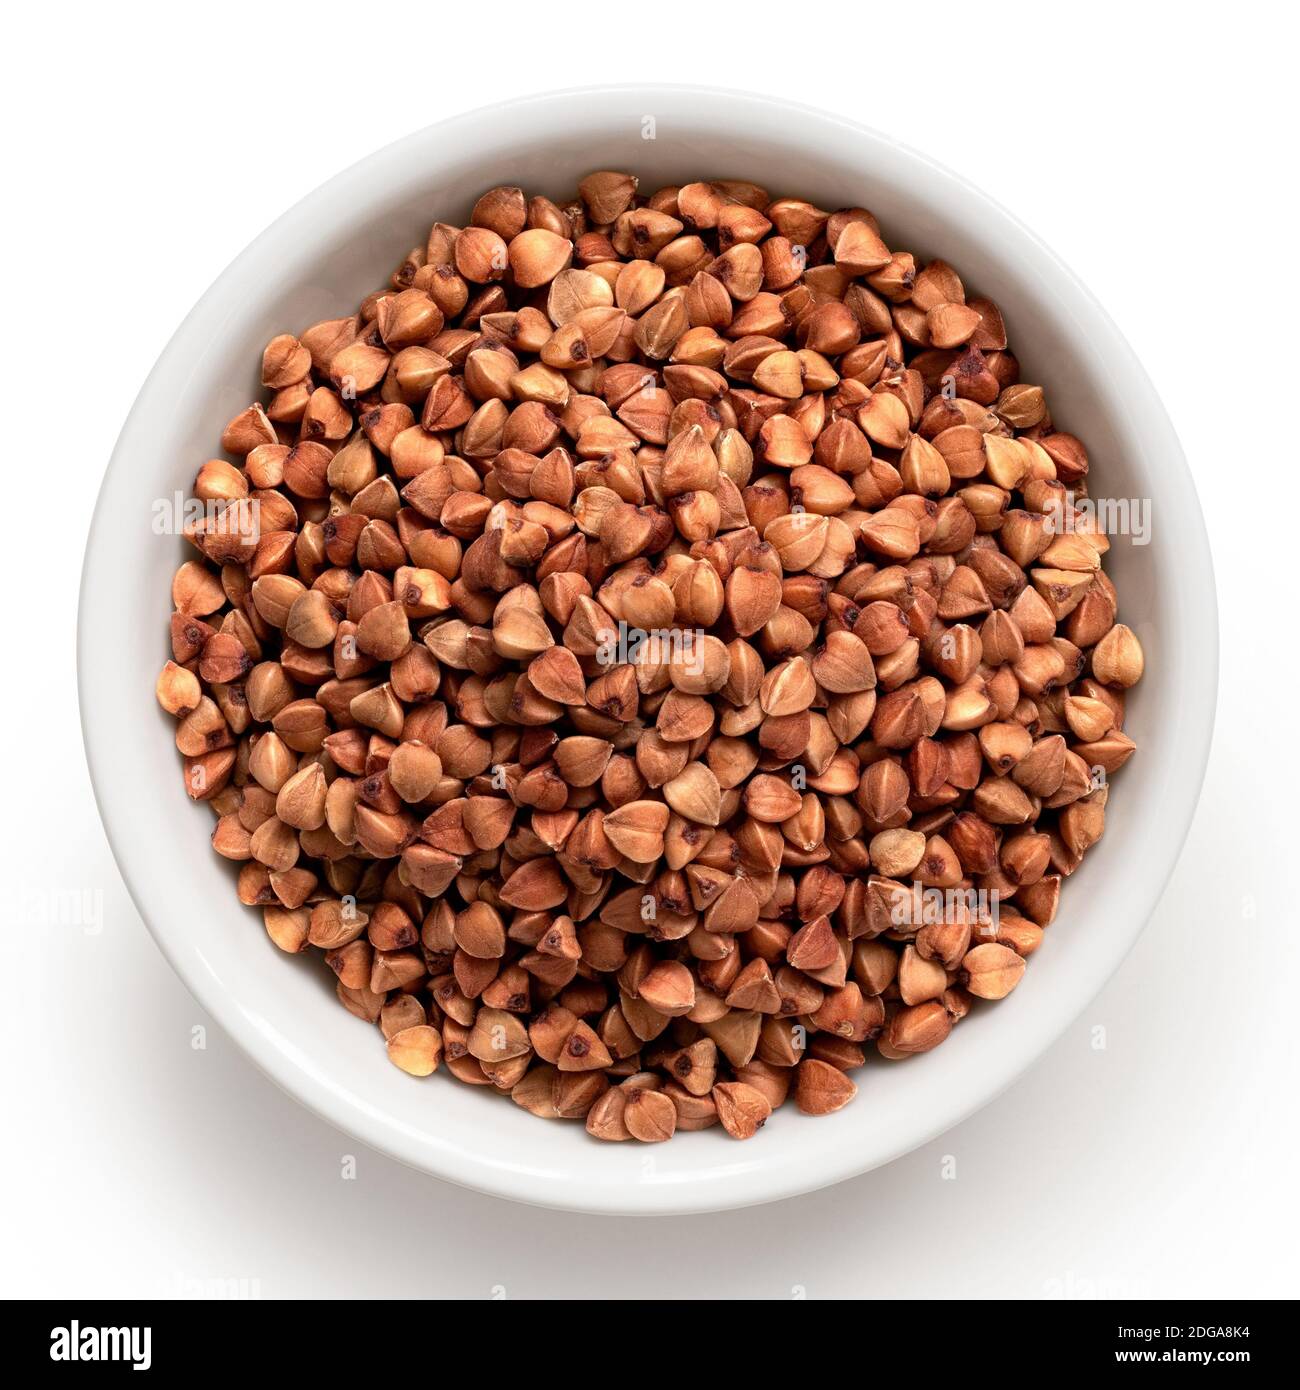 Raw toasted buckwheat in a white ceramic bowl isolated on white. Top view. Stock Photo